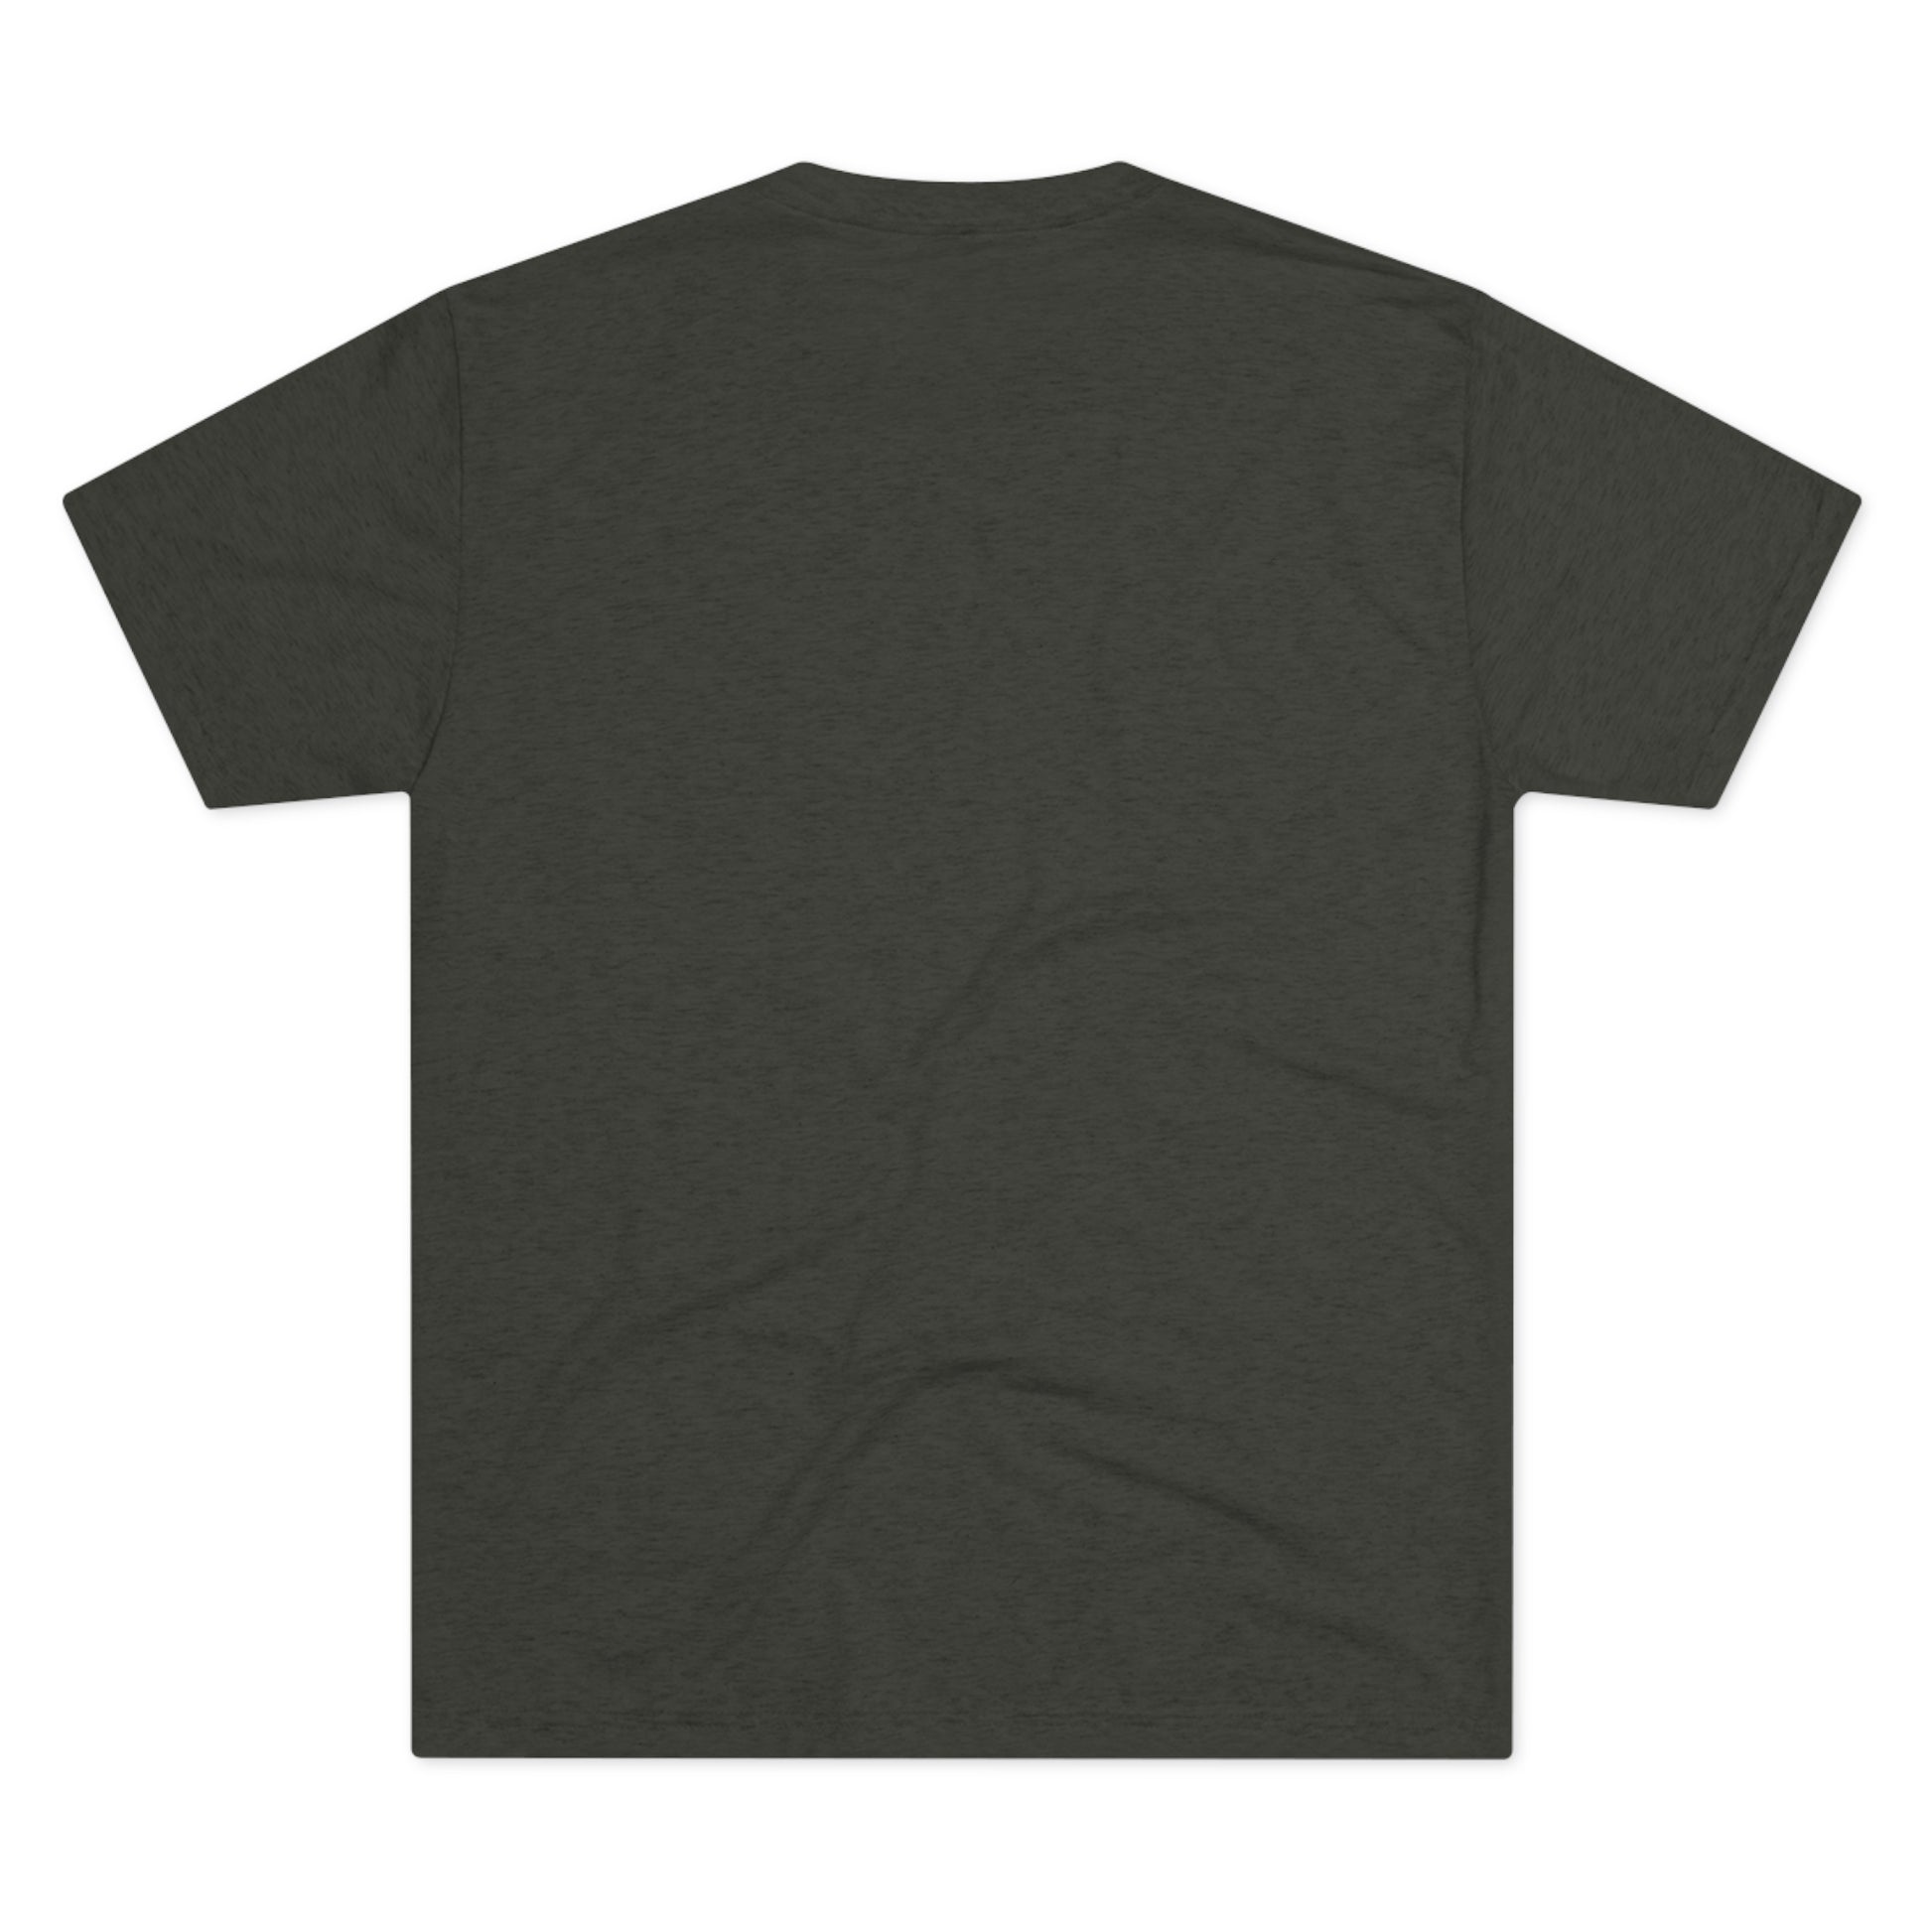 Back view of a plain charcoal gray Inhale Strength Exhale Doubt w Images - Unisex Tri-Blend Crew Tee displayed on a flat surface without any visible designs or logos by Printify.